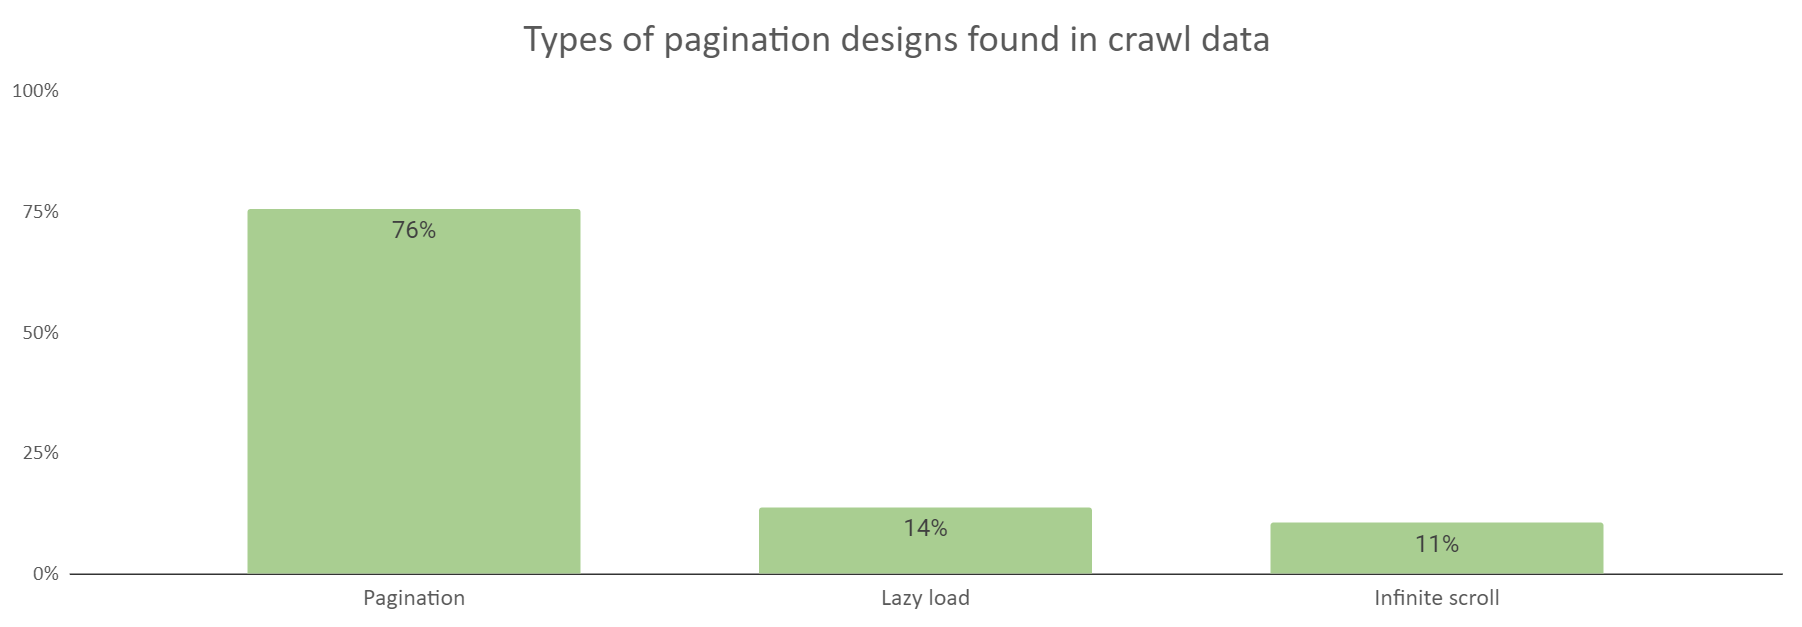 The types of web designs found in crawl data 